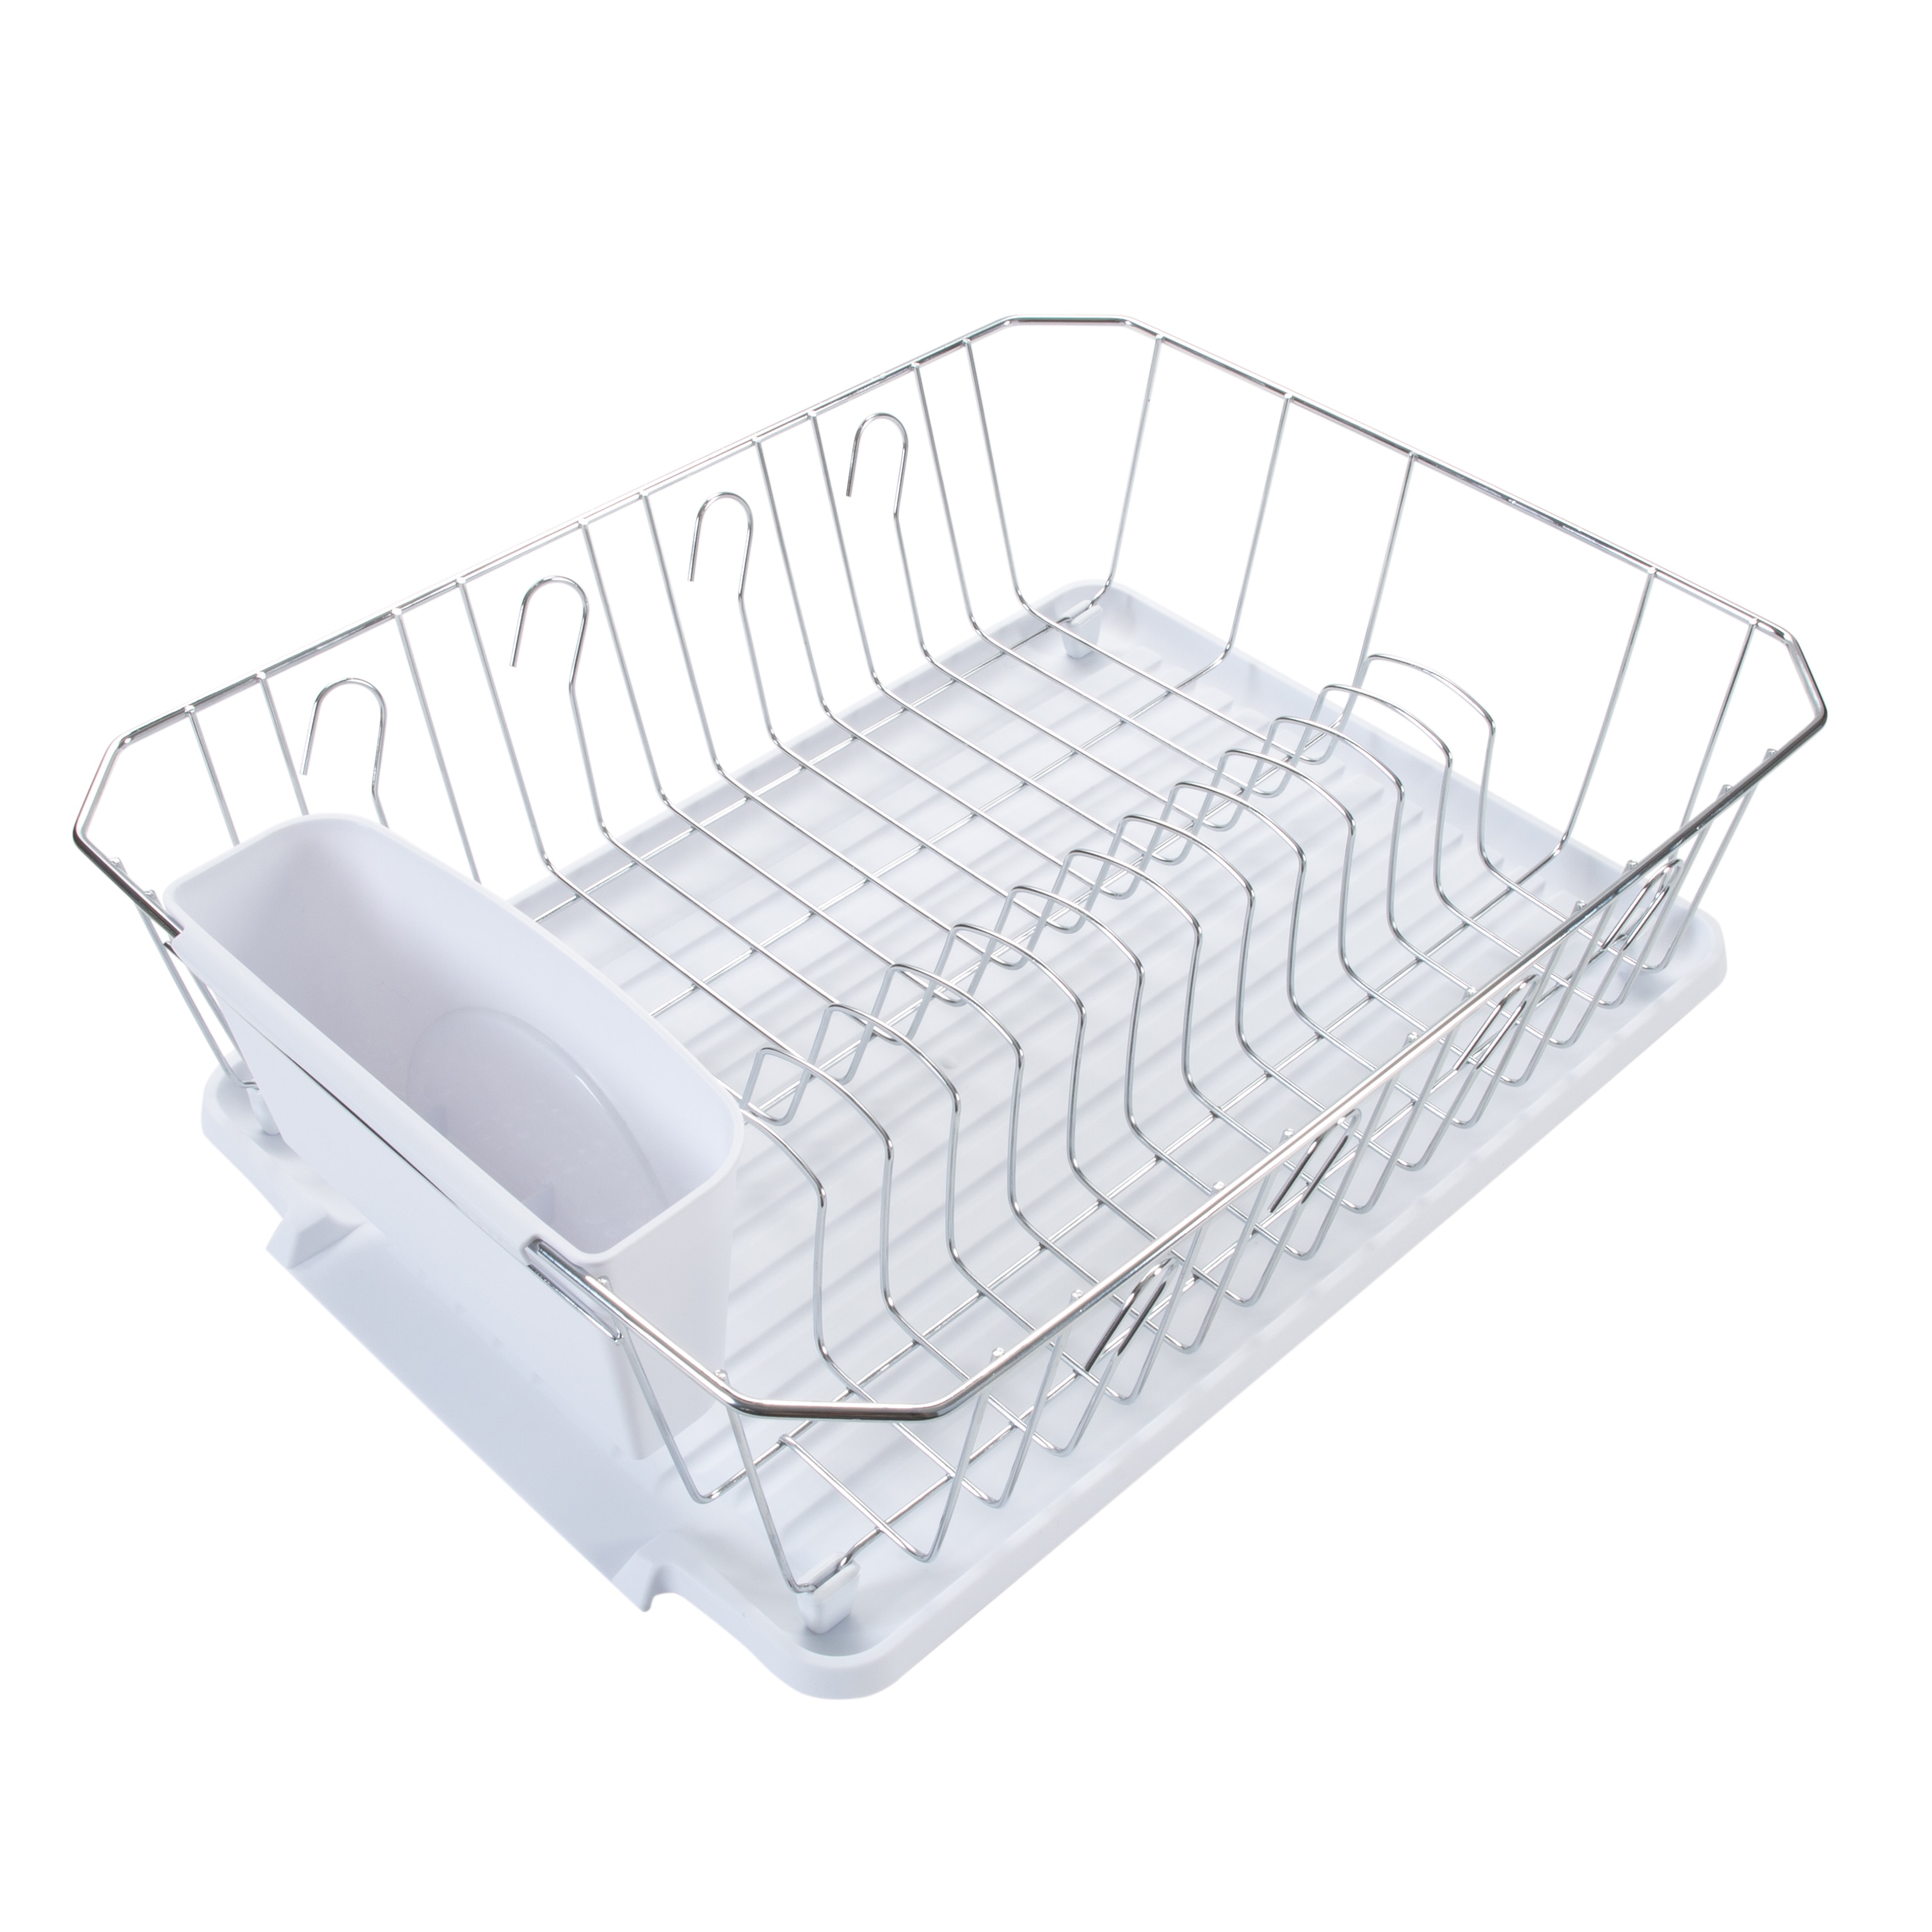 Kitchen Details Large Industrial Collection Dish Rack 28615-grey